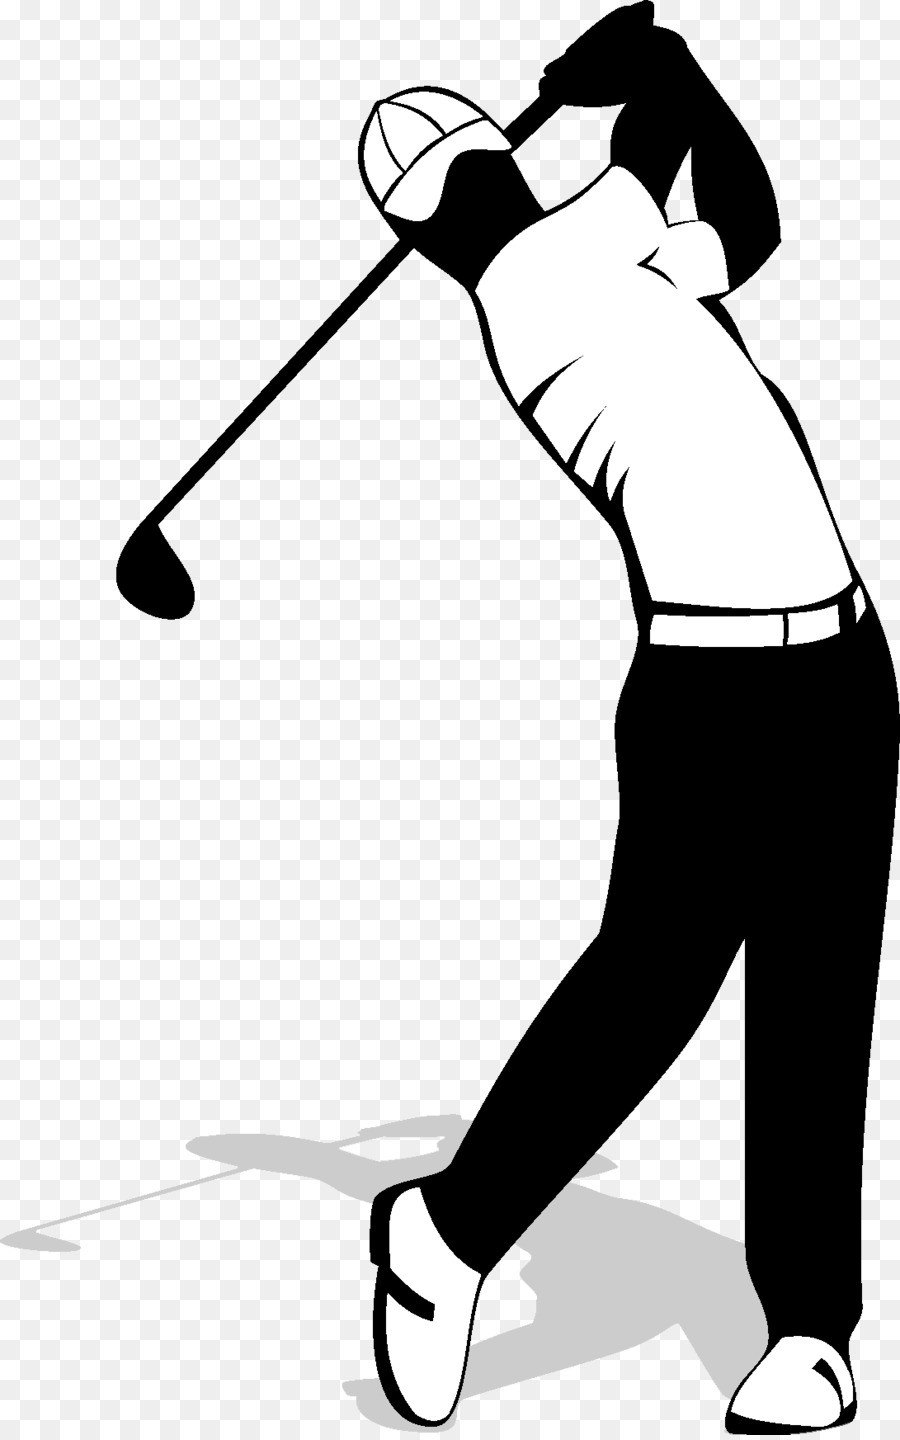 Golf Clubs Golf course - basketball silhouette png download - 1091*1739 - Free Transparent Golf png Download.